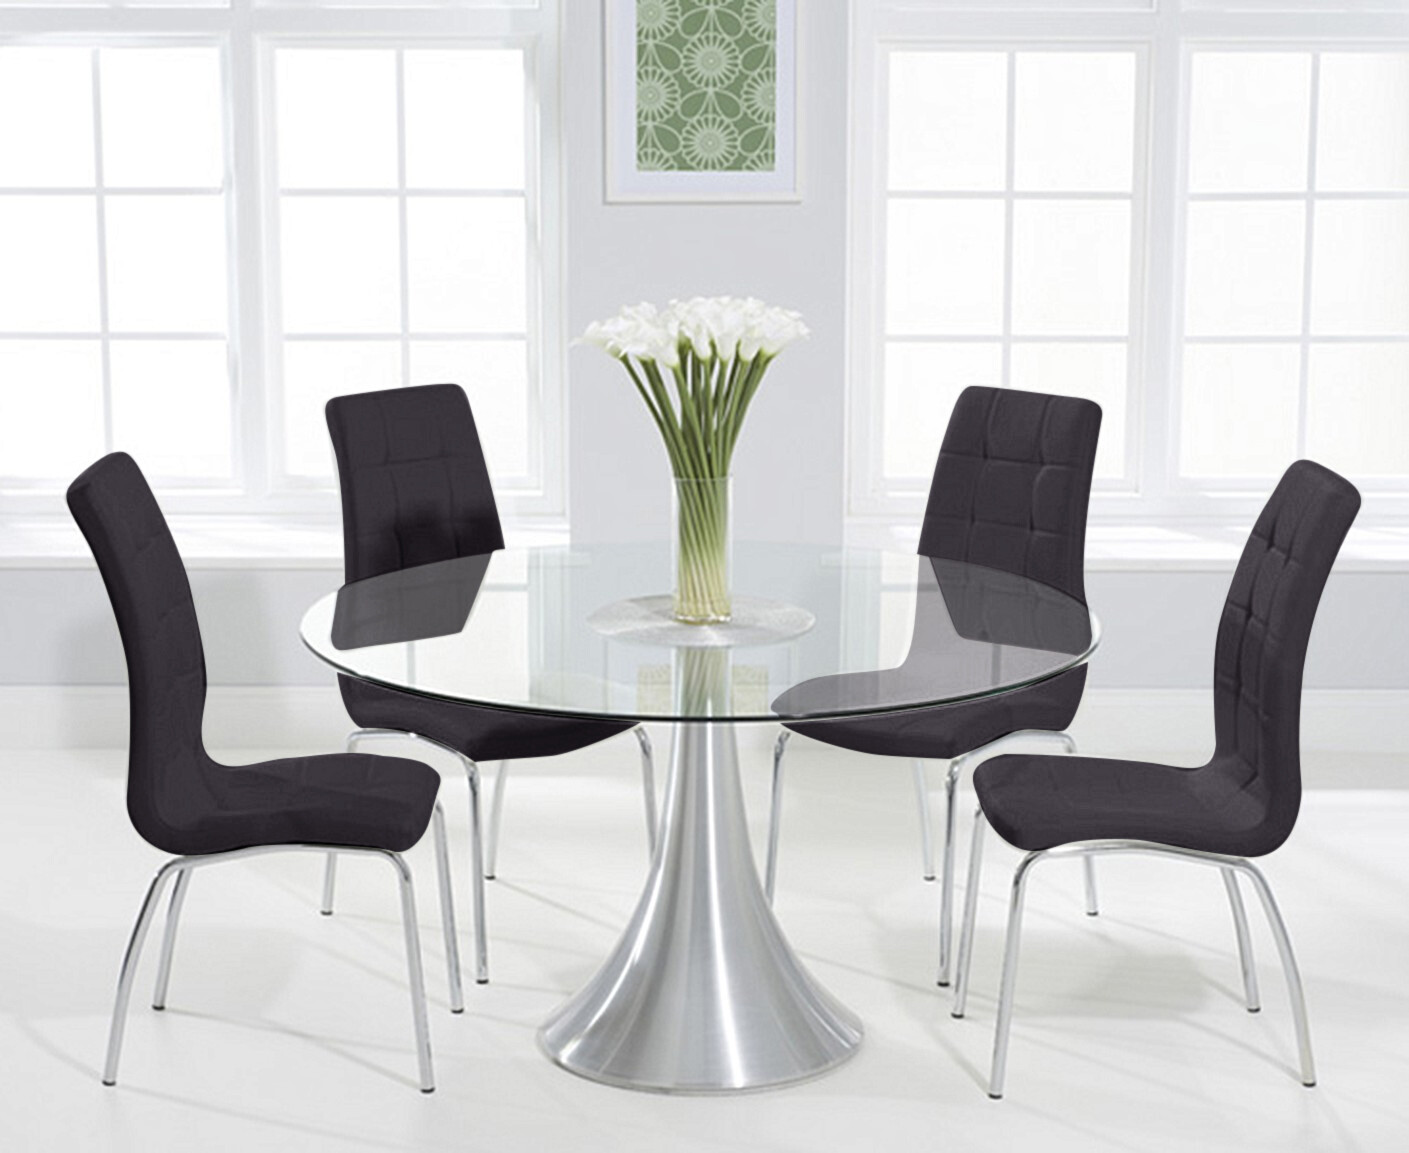 Photo 2 of Paloma 135cm round glass dining table with 6 grey enzo chairs